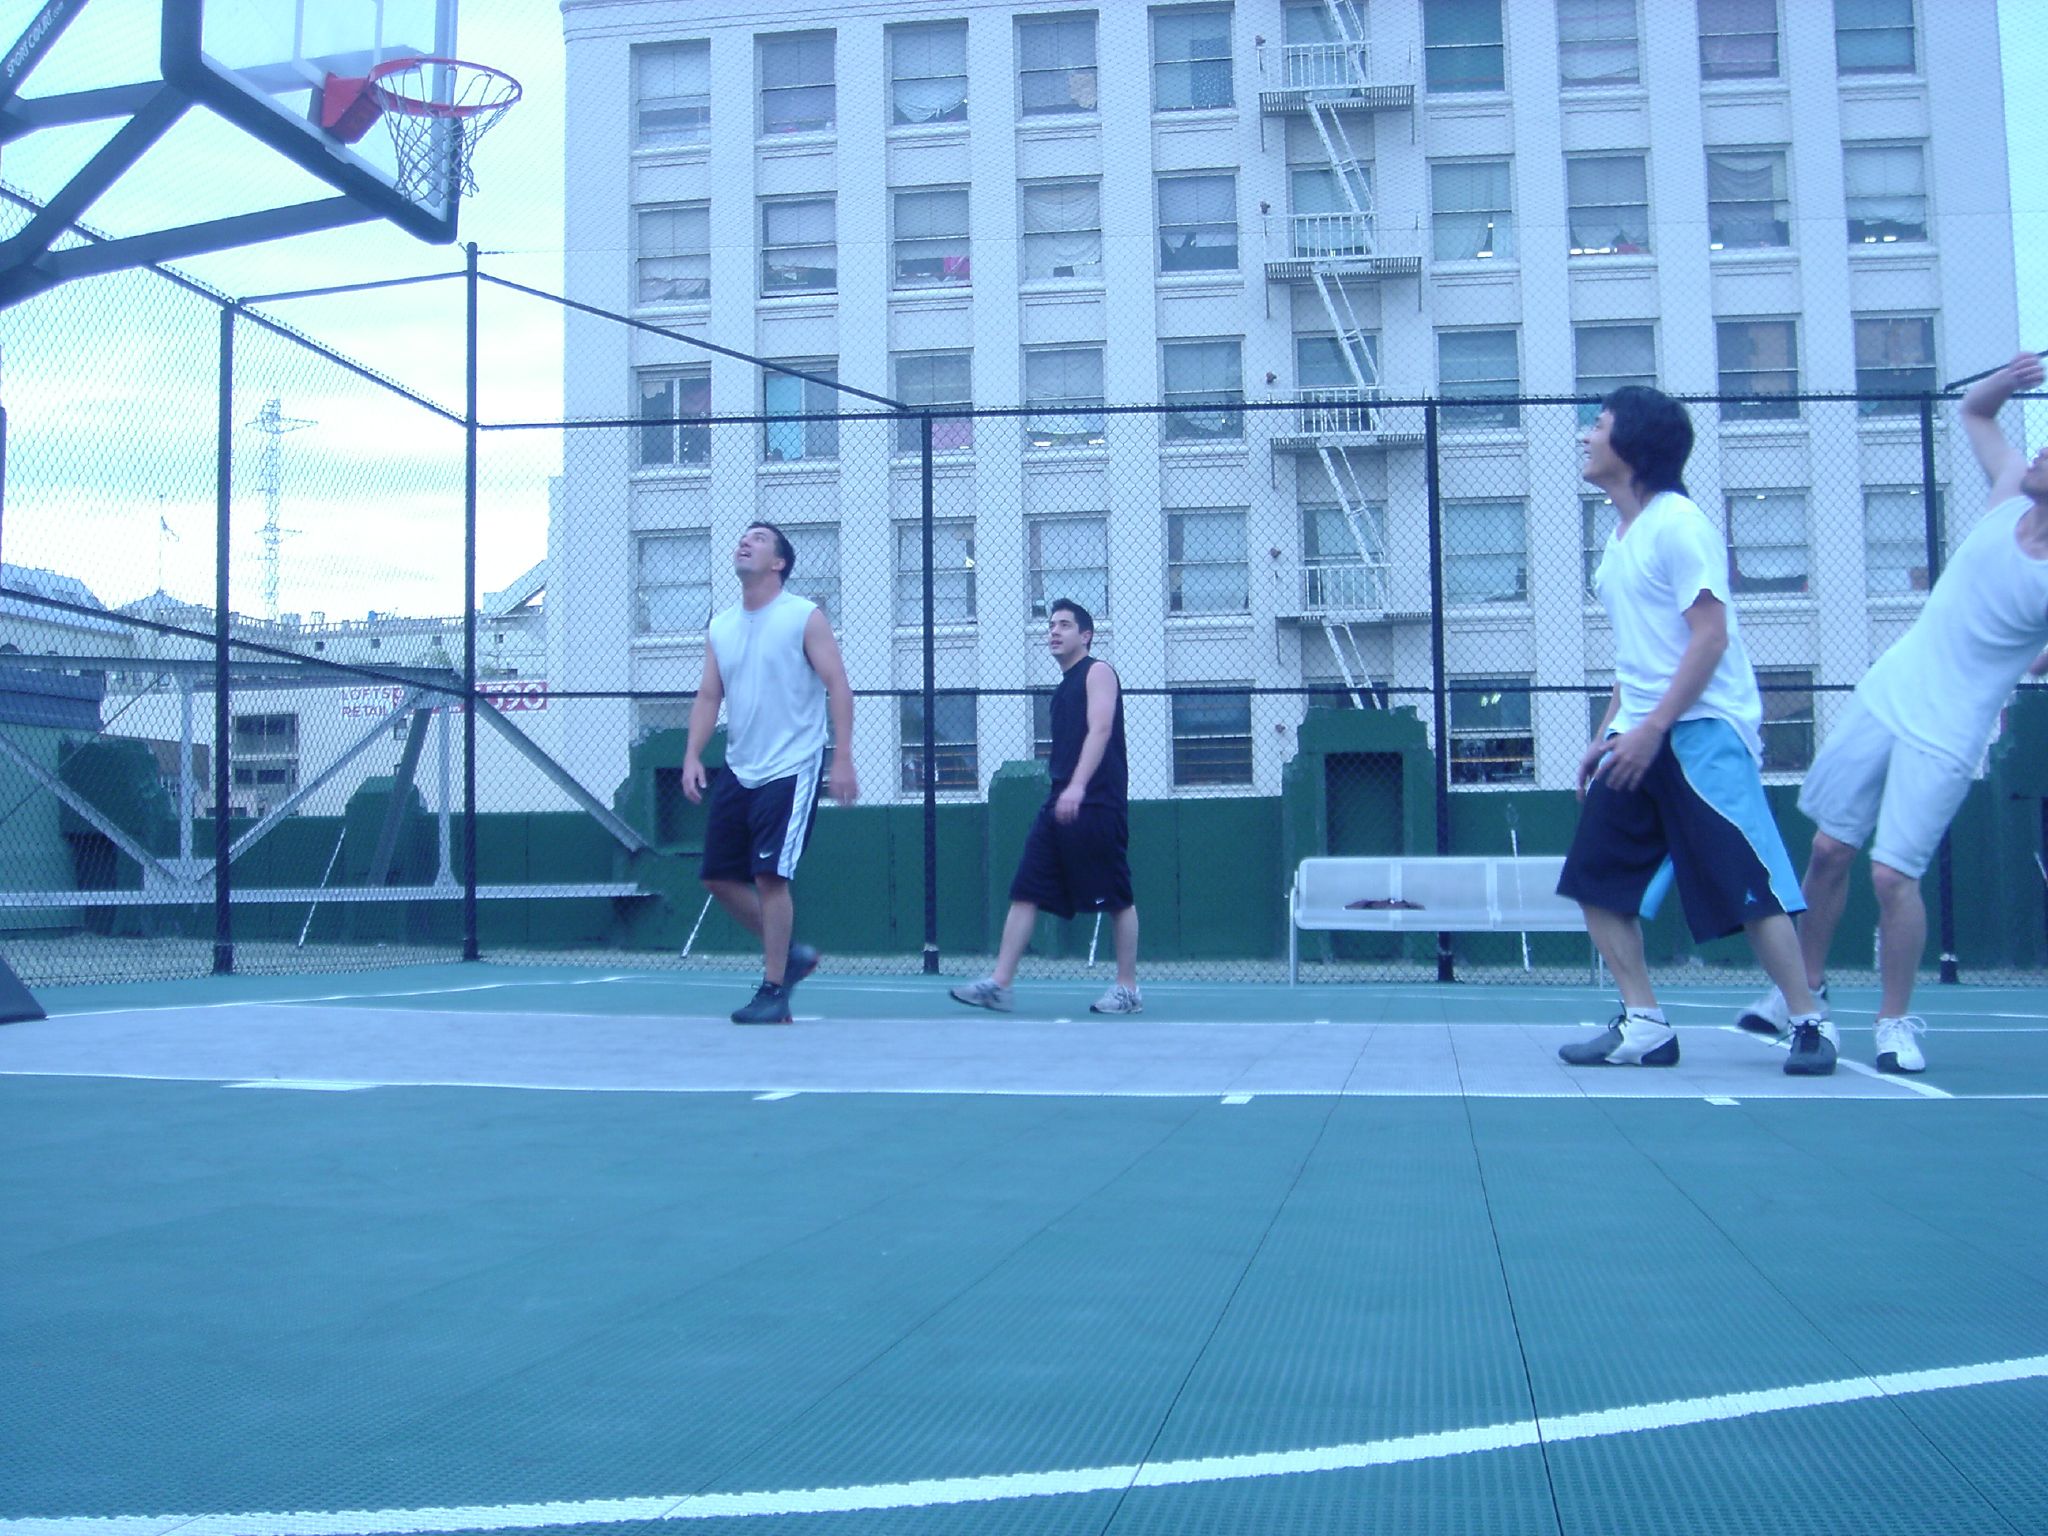 a group of men play basketball on a court